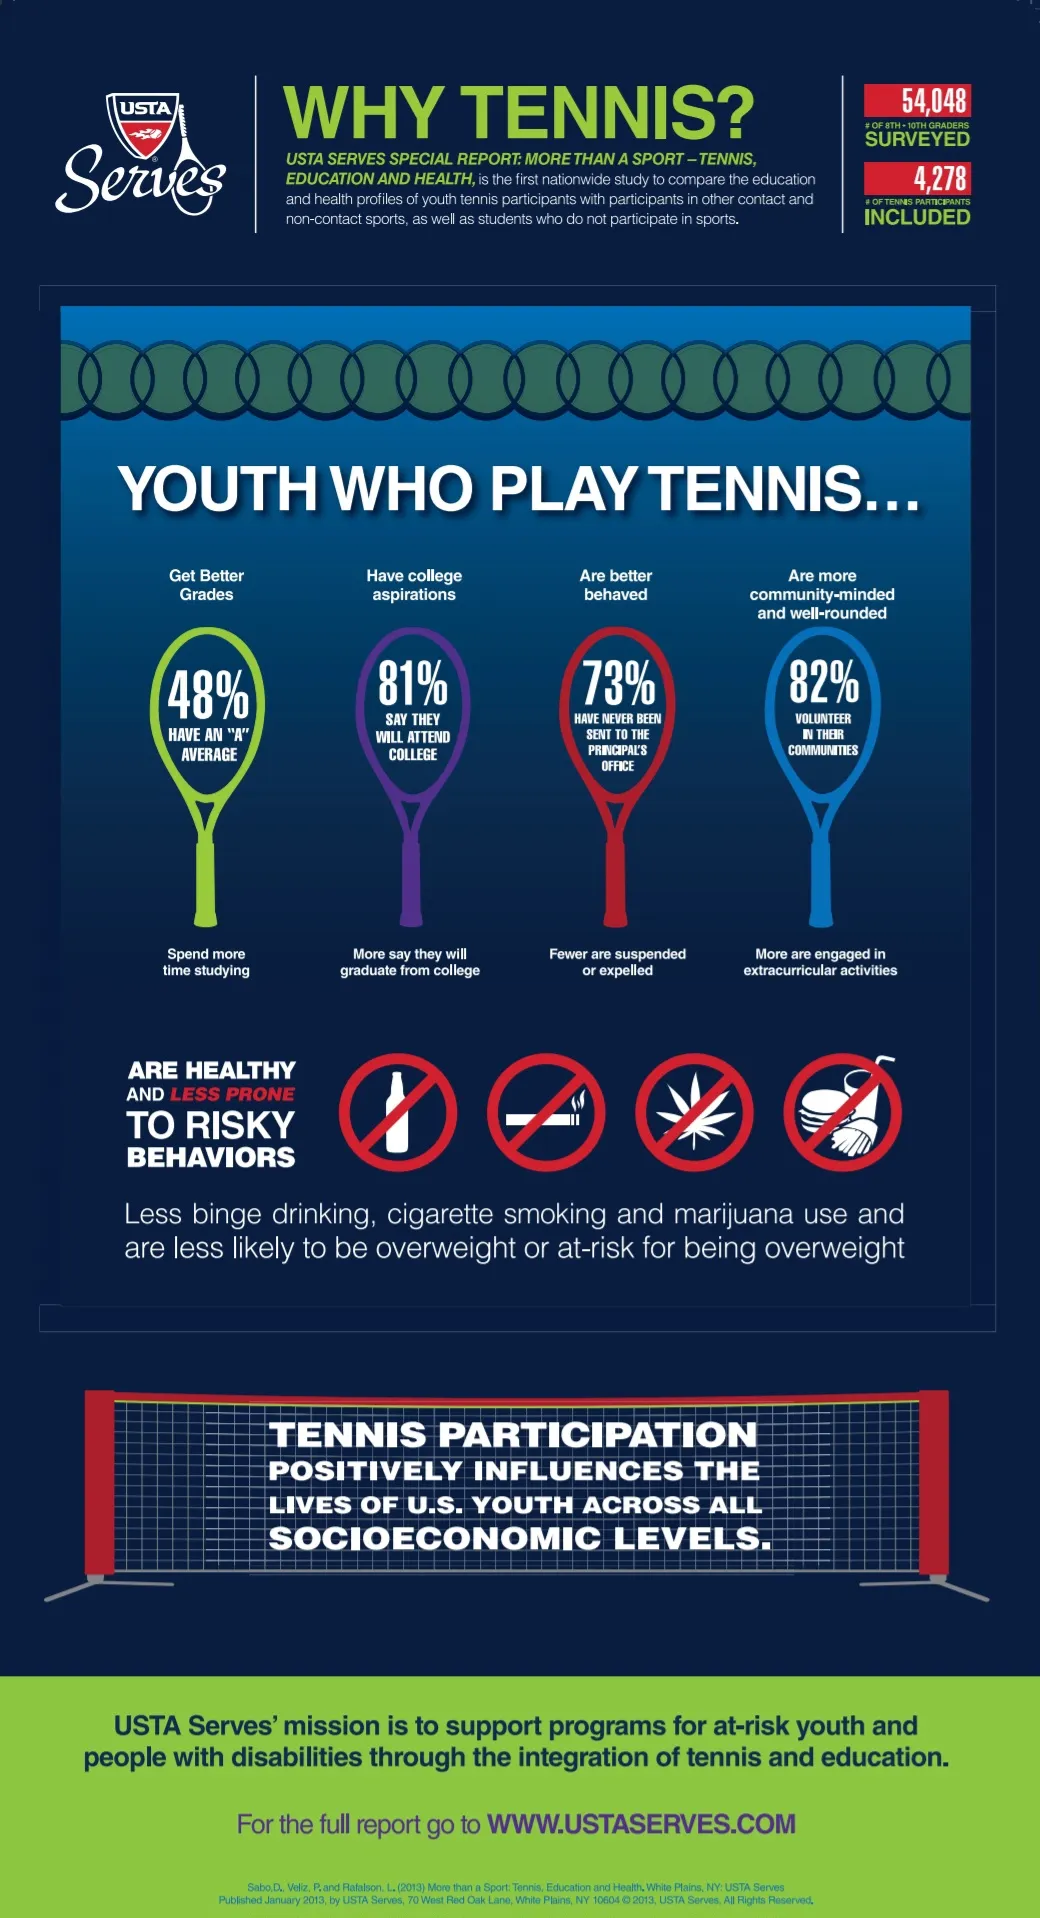 Information about youth who play tennis